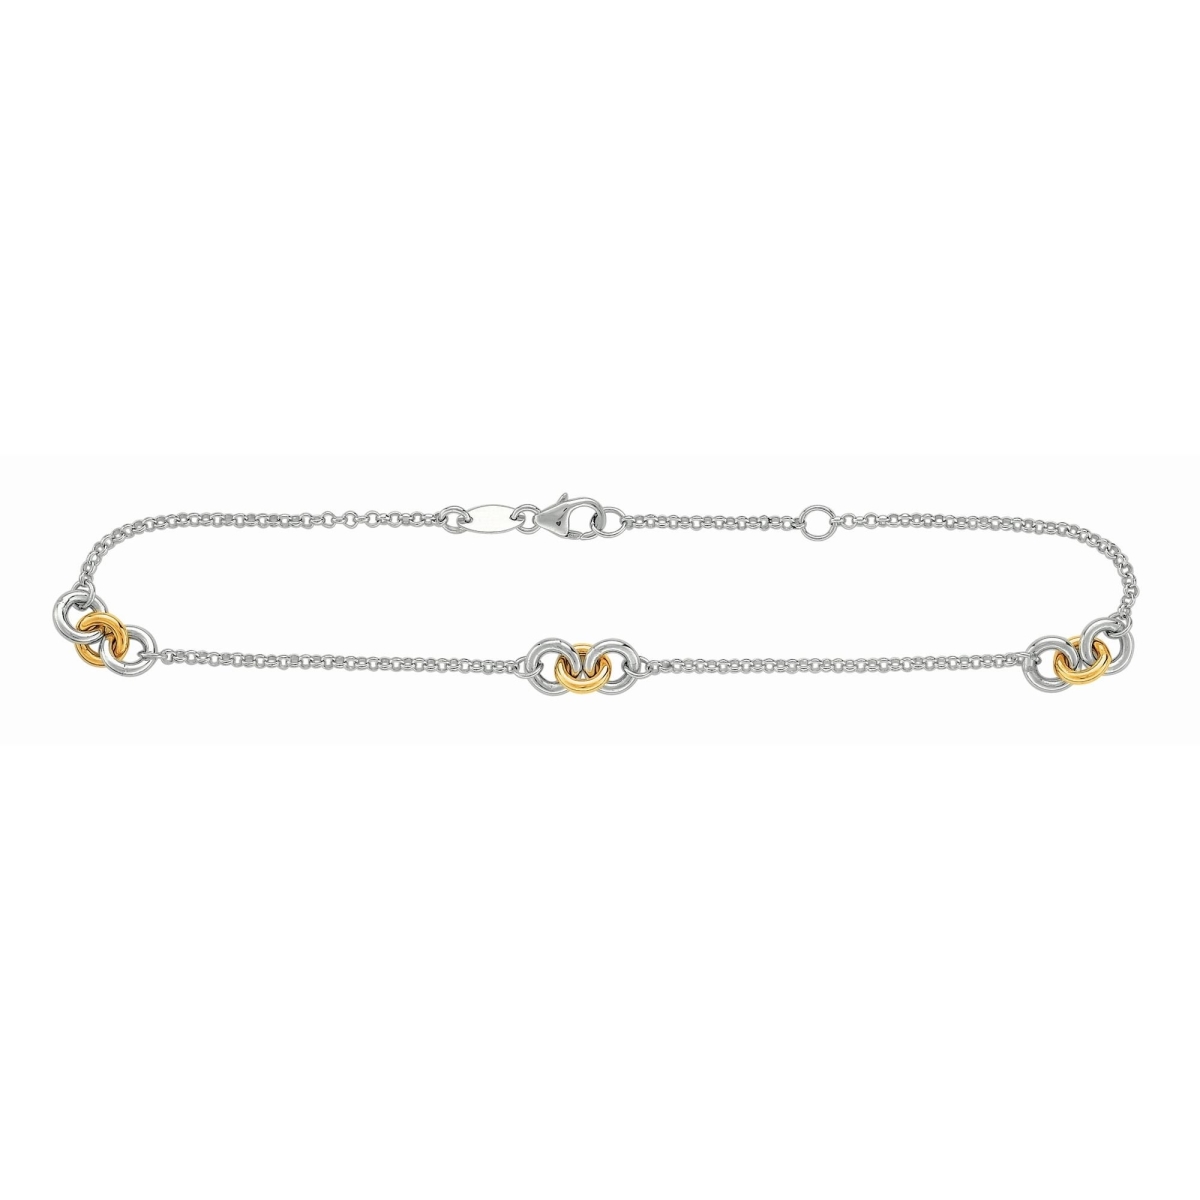 UPC 742431212323 product image for 10 in. 14K Sterling Silver Diamond Cut Textured Anklet with Lobster Clasp | upcitemdb.com